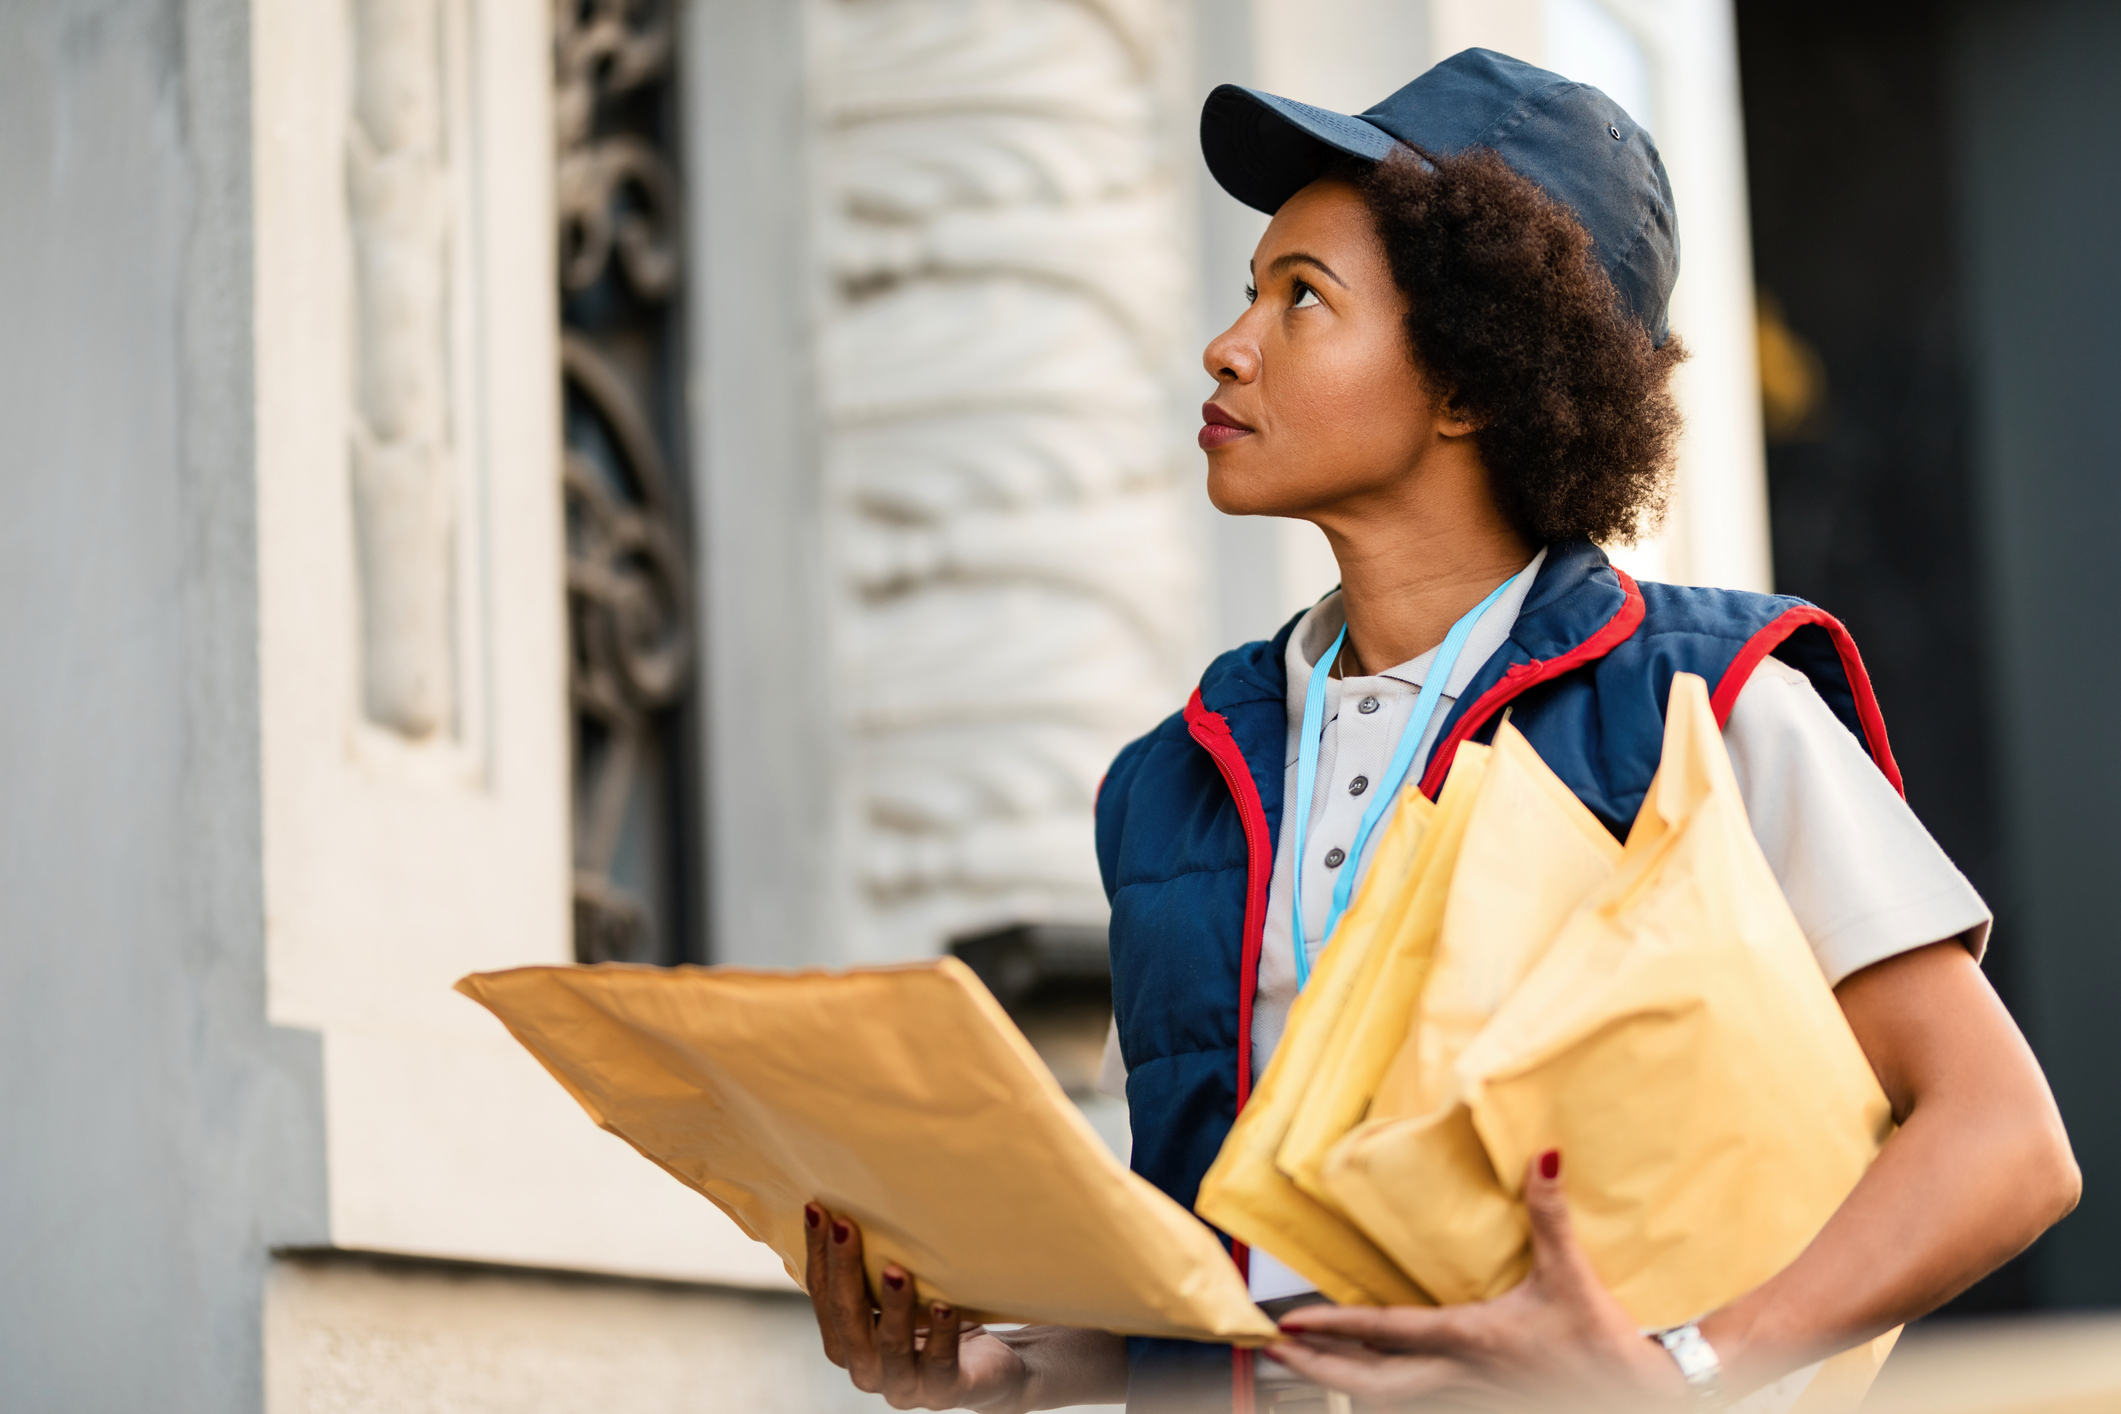 Black postwoman delivering mail in residential district.